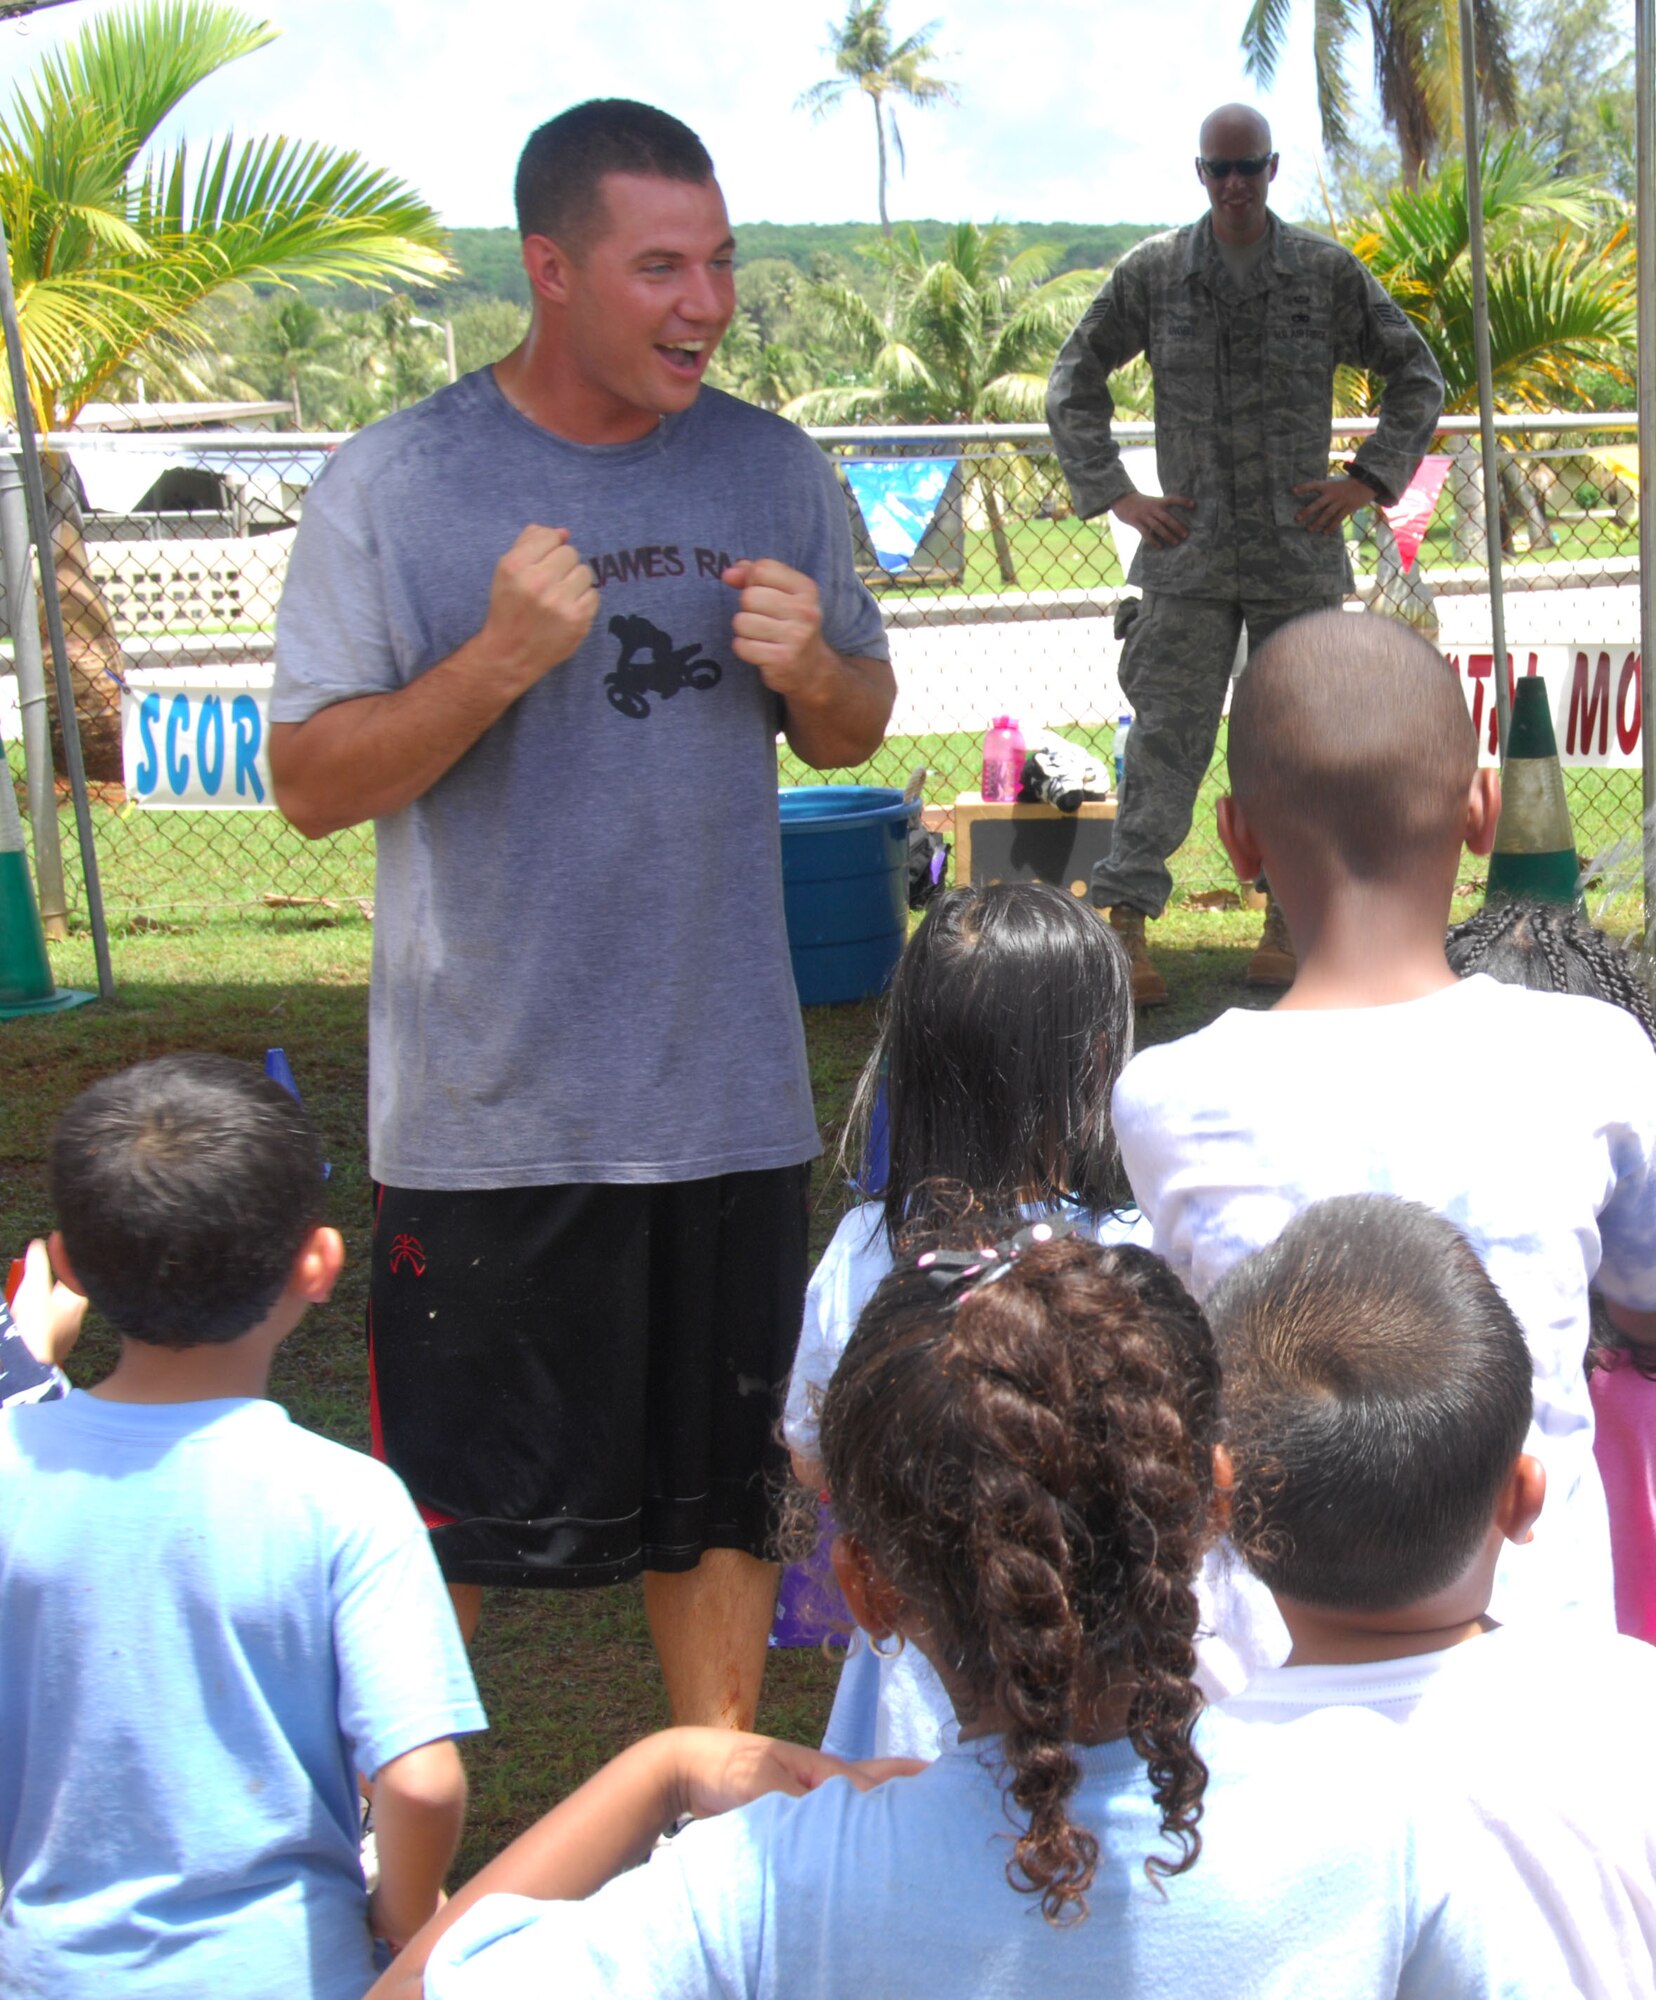 ANDERSEN AIR FORCE BASE, Guam - Senior Airman David Demarest, 36th Mobility Response Squadron crew chief, explains the object of the relay race station to Andersen Elementary School students during Fun and Fitness Week May 8. Fun and Fitness Week is an annual event held to promote being physically active. (U.S. Air Force photo by Senior Airman Shane Dunaway)